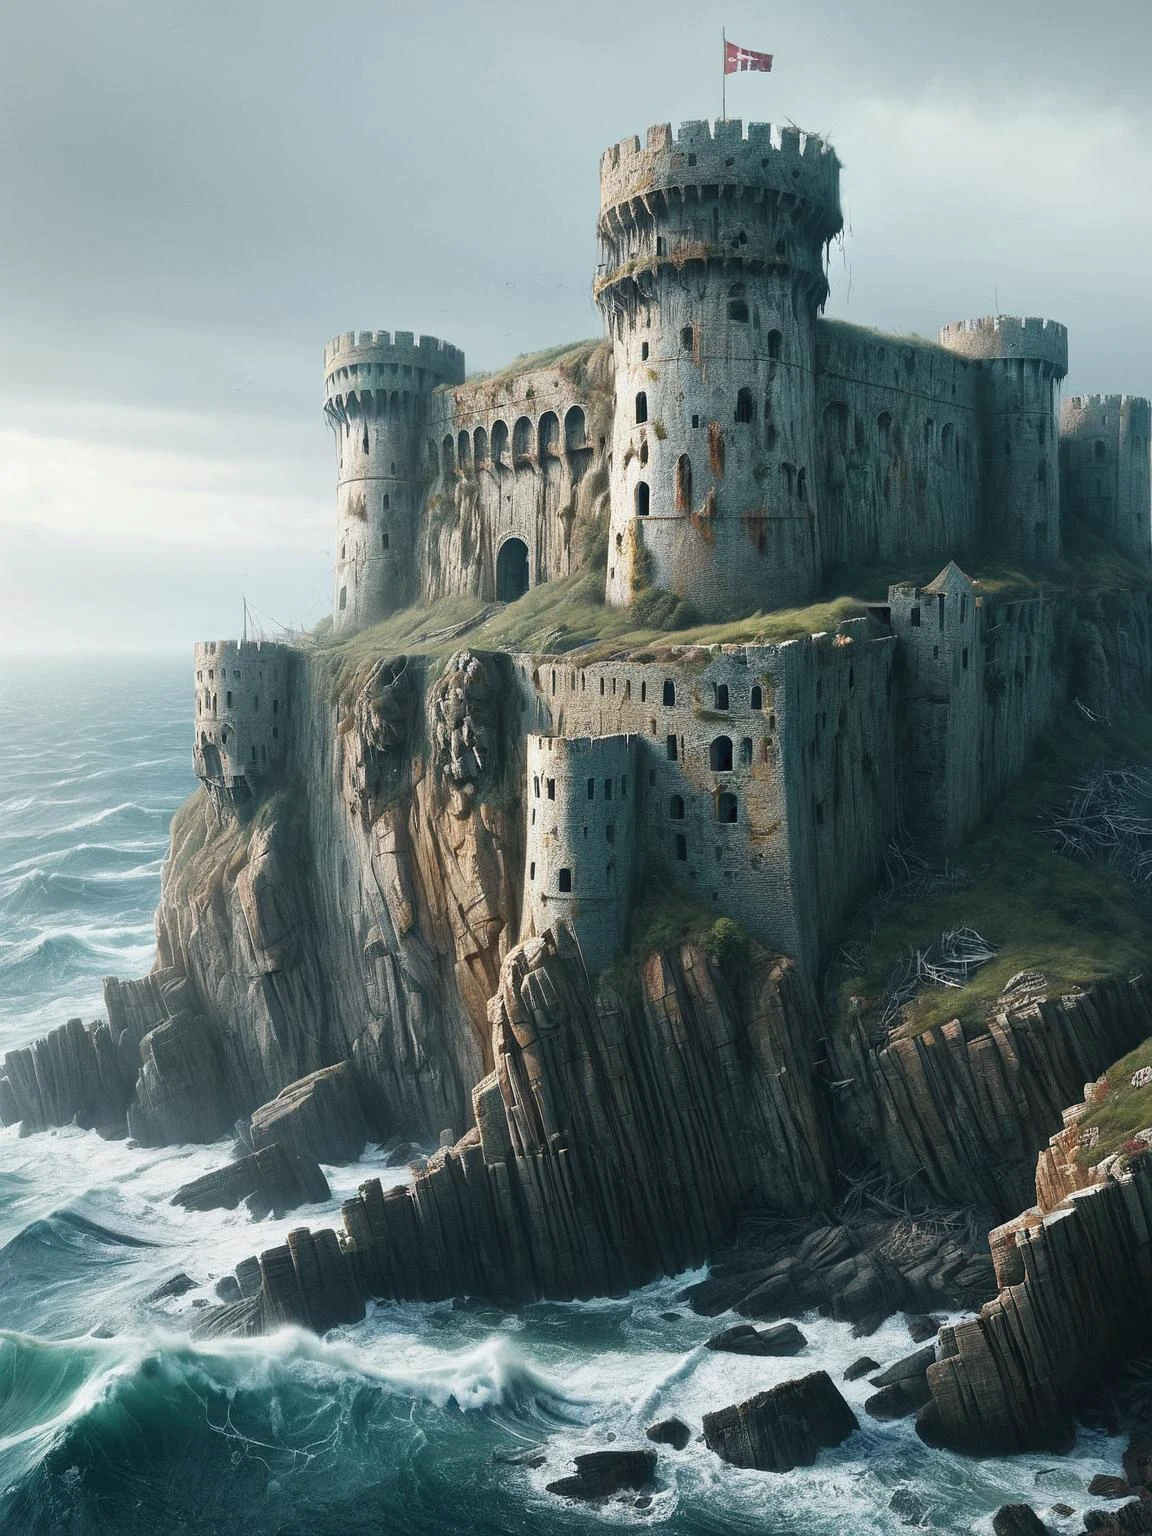 An ais-abandz fortress on a sea-facing cliff, enduring the relentless assault of waves and wind 4k, uhd,masterpiece